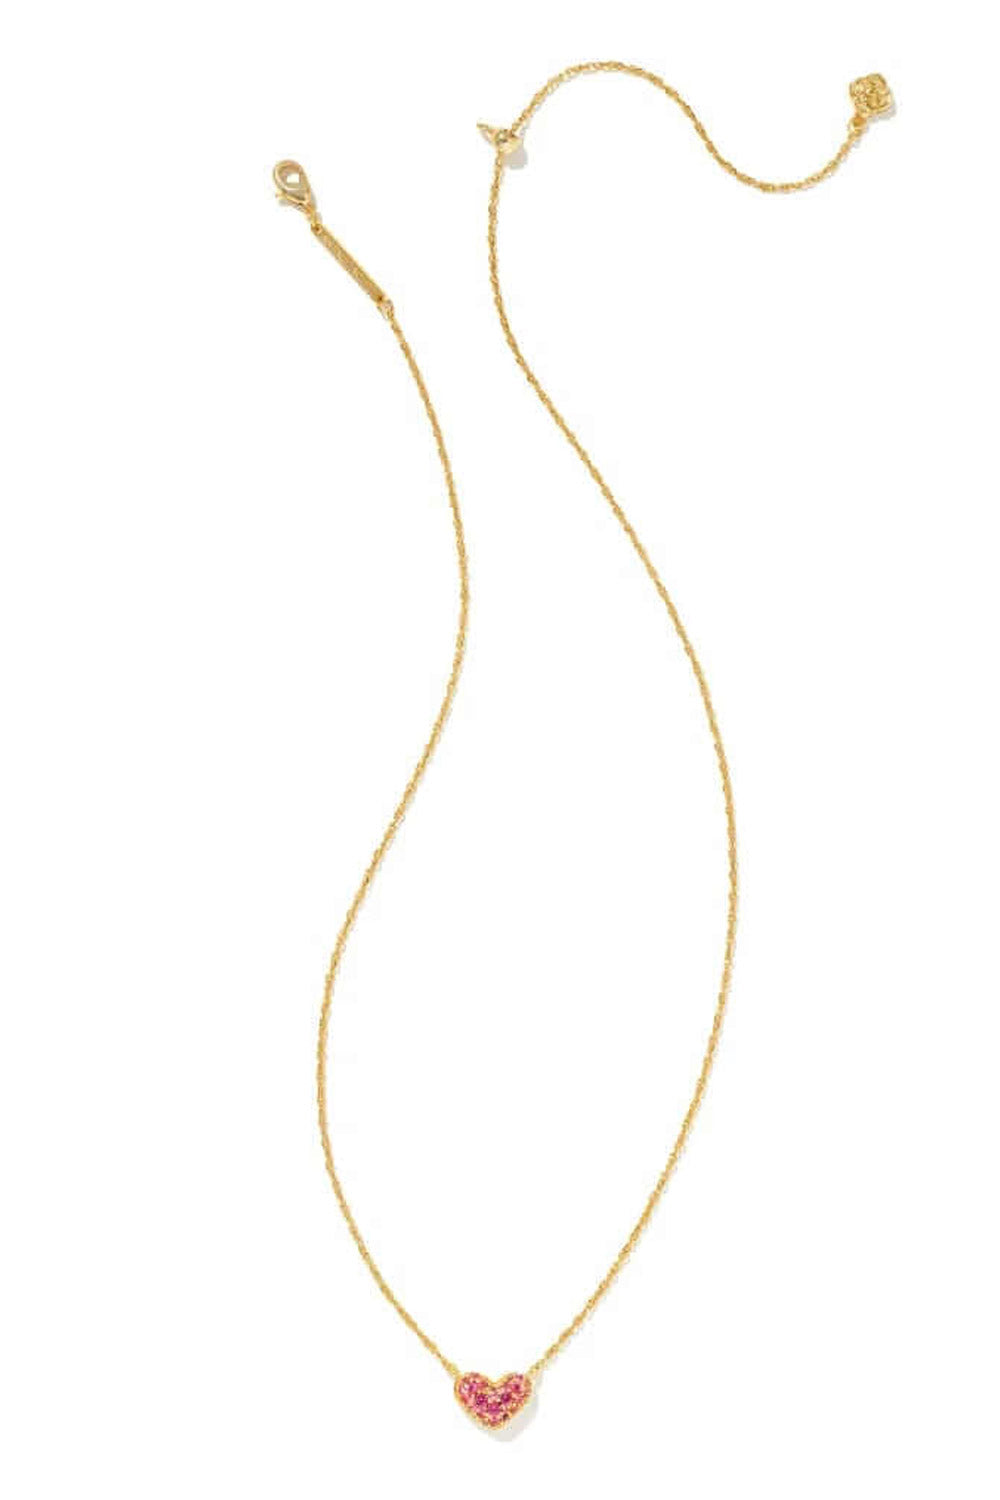 Kendra Scott Cooper Pendant Necklace in Iridescent Drusy | The Summit at  Fritz Farm